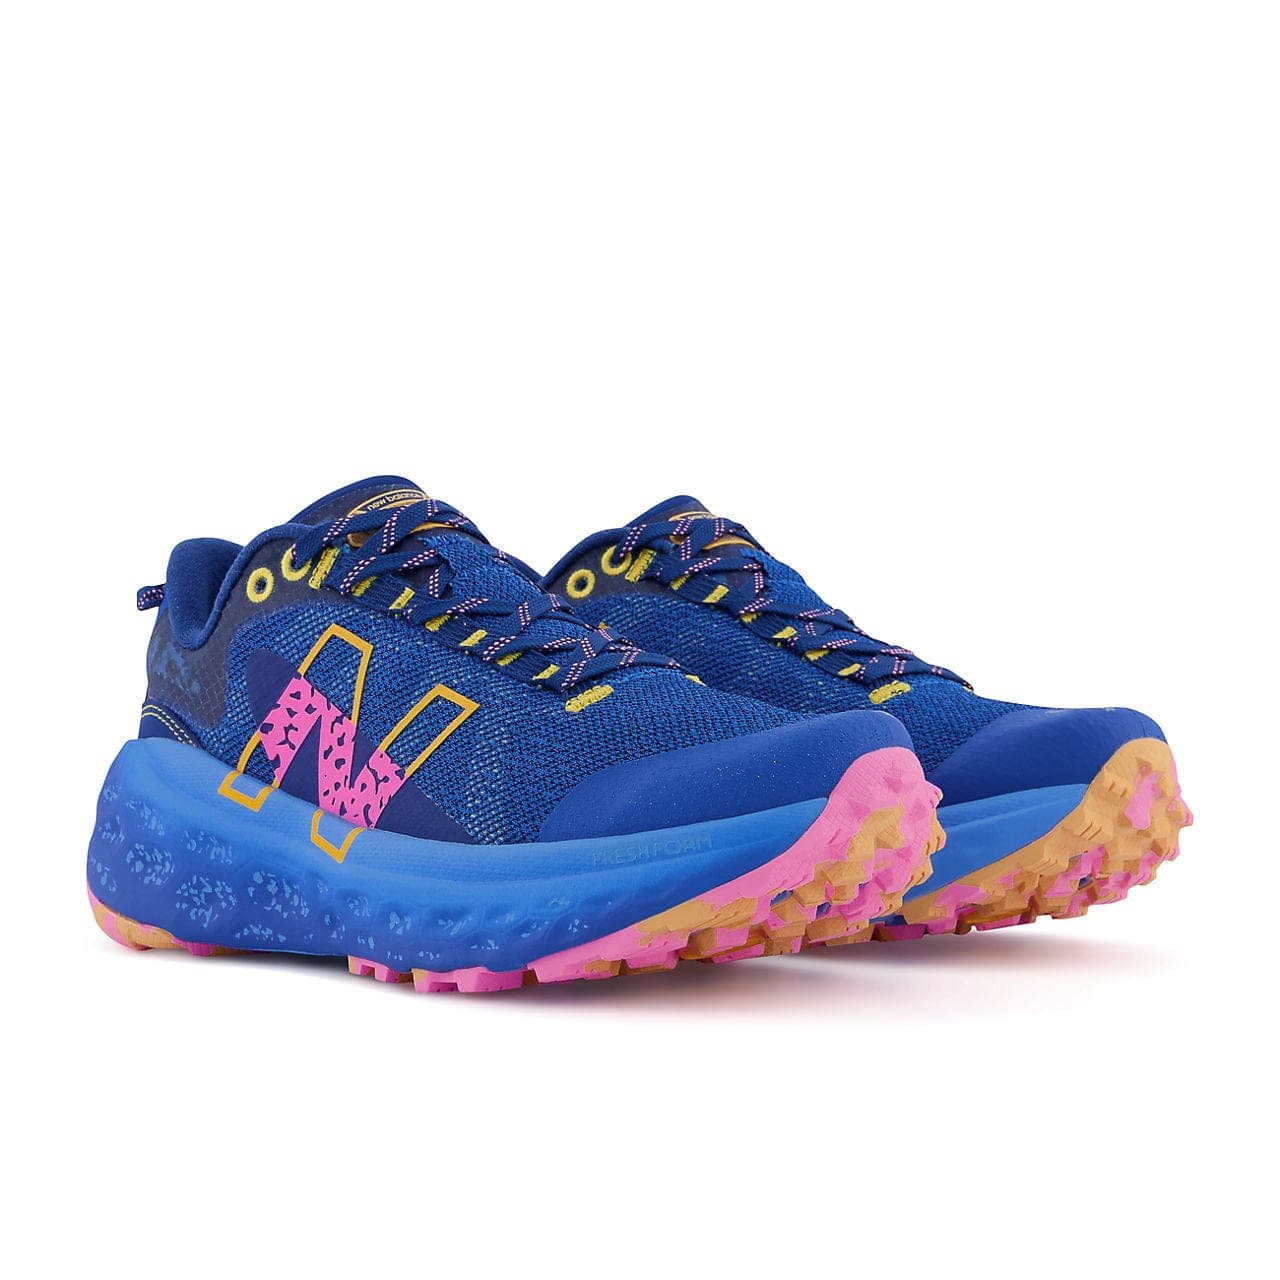 New Balance Fresh Foam X More Trail v2 (Women's) - Blue with vibrant apricot and vibrant pink